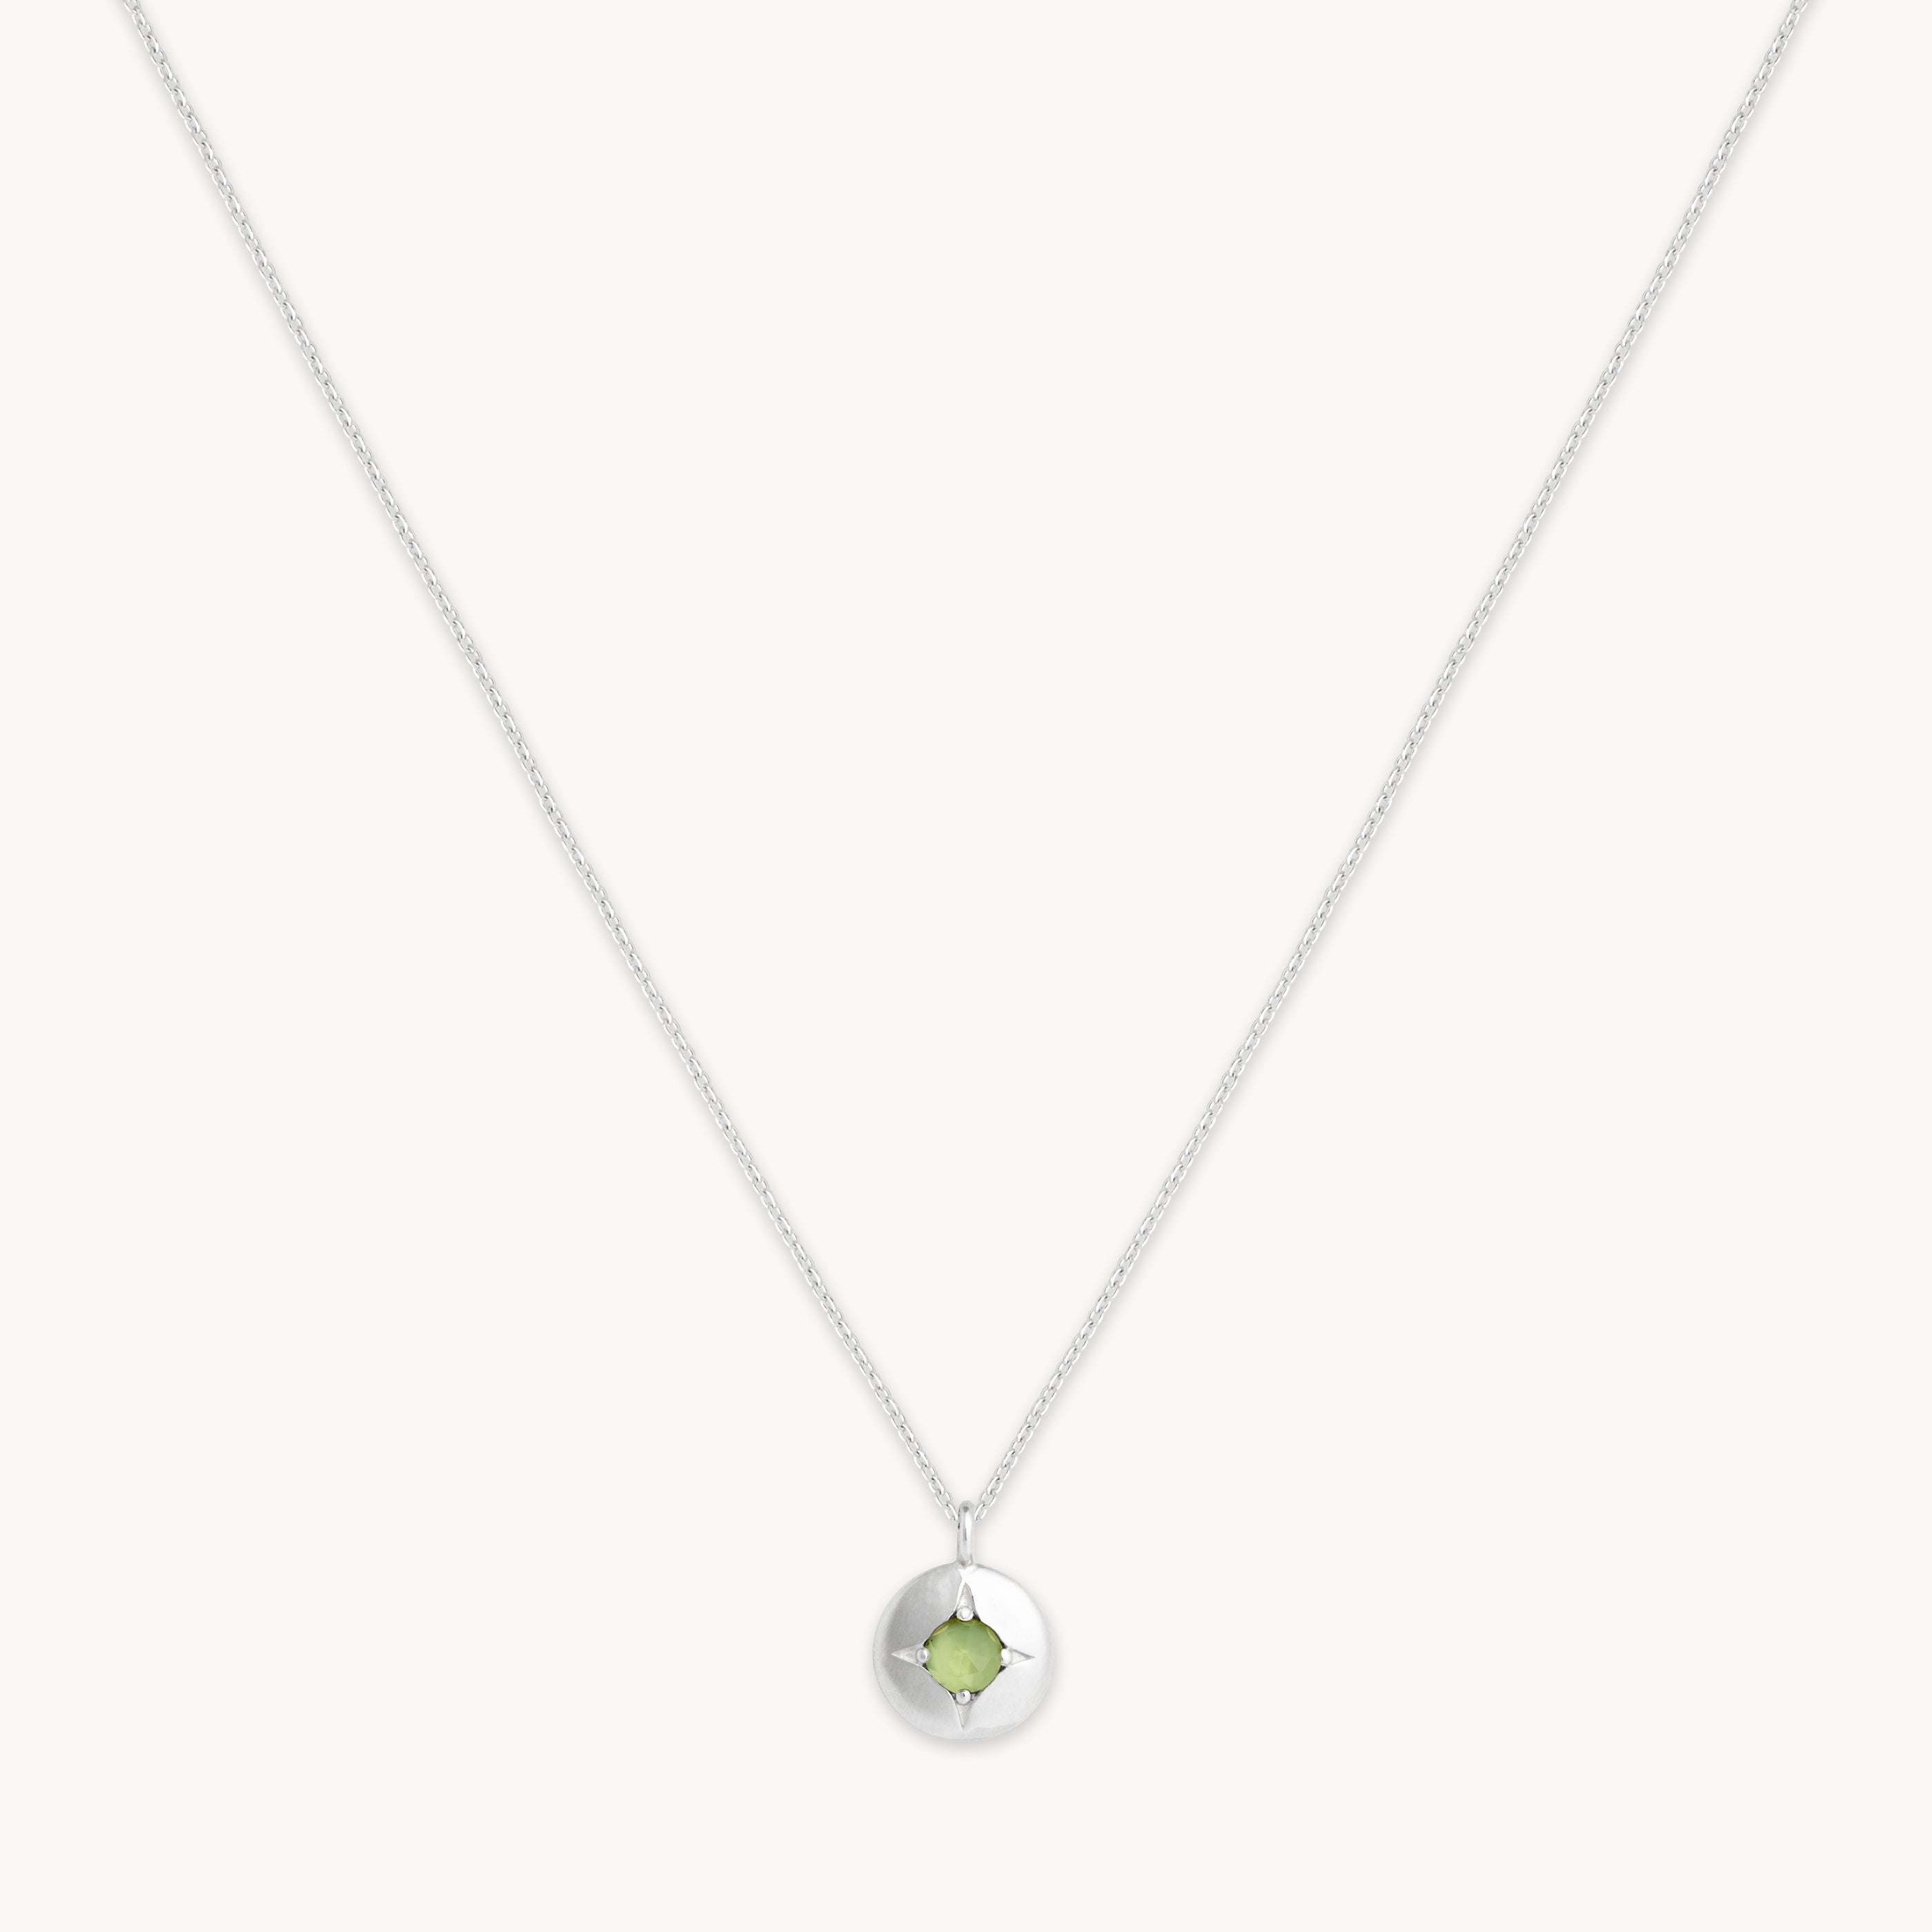 August Peridot Birthstone Necklace in Solid White Gold